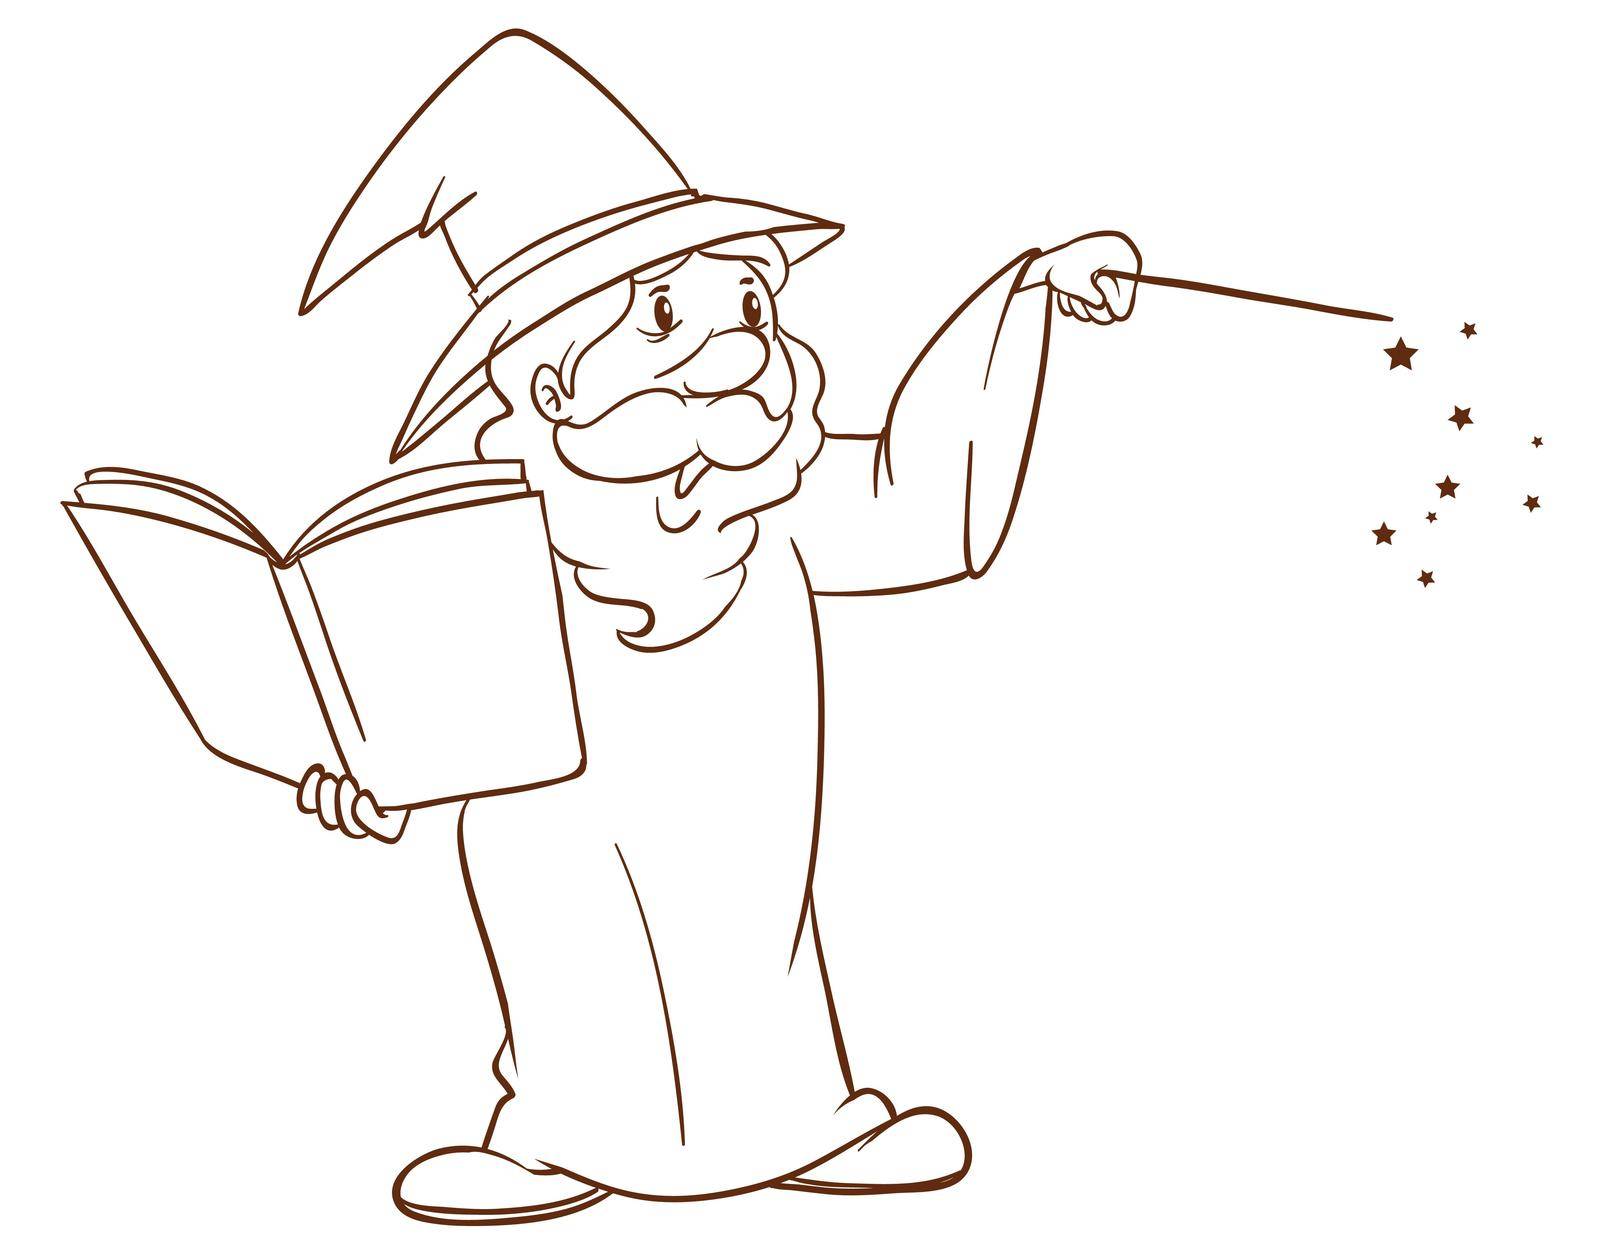 Illustration of a simple sketch of a wizard on a white background